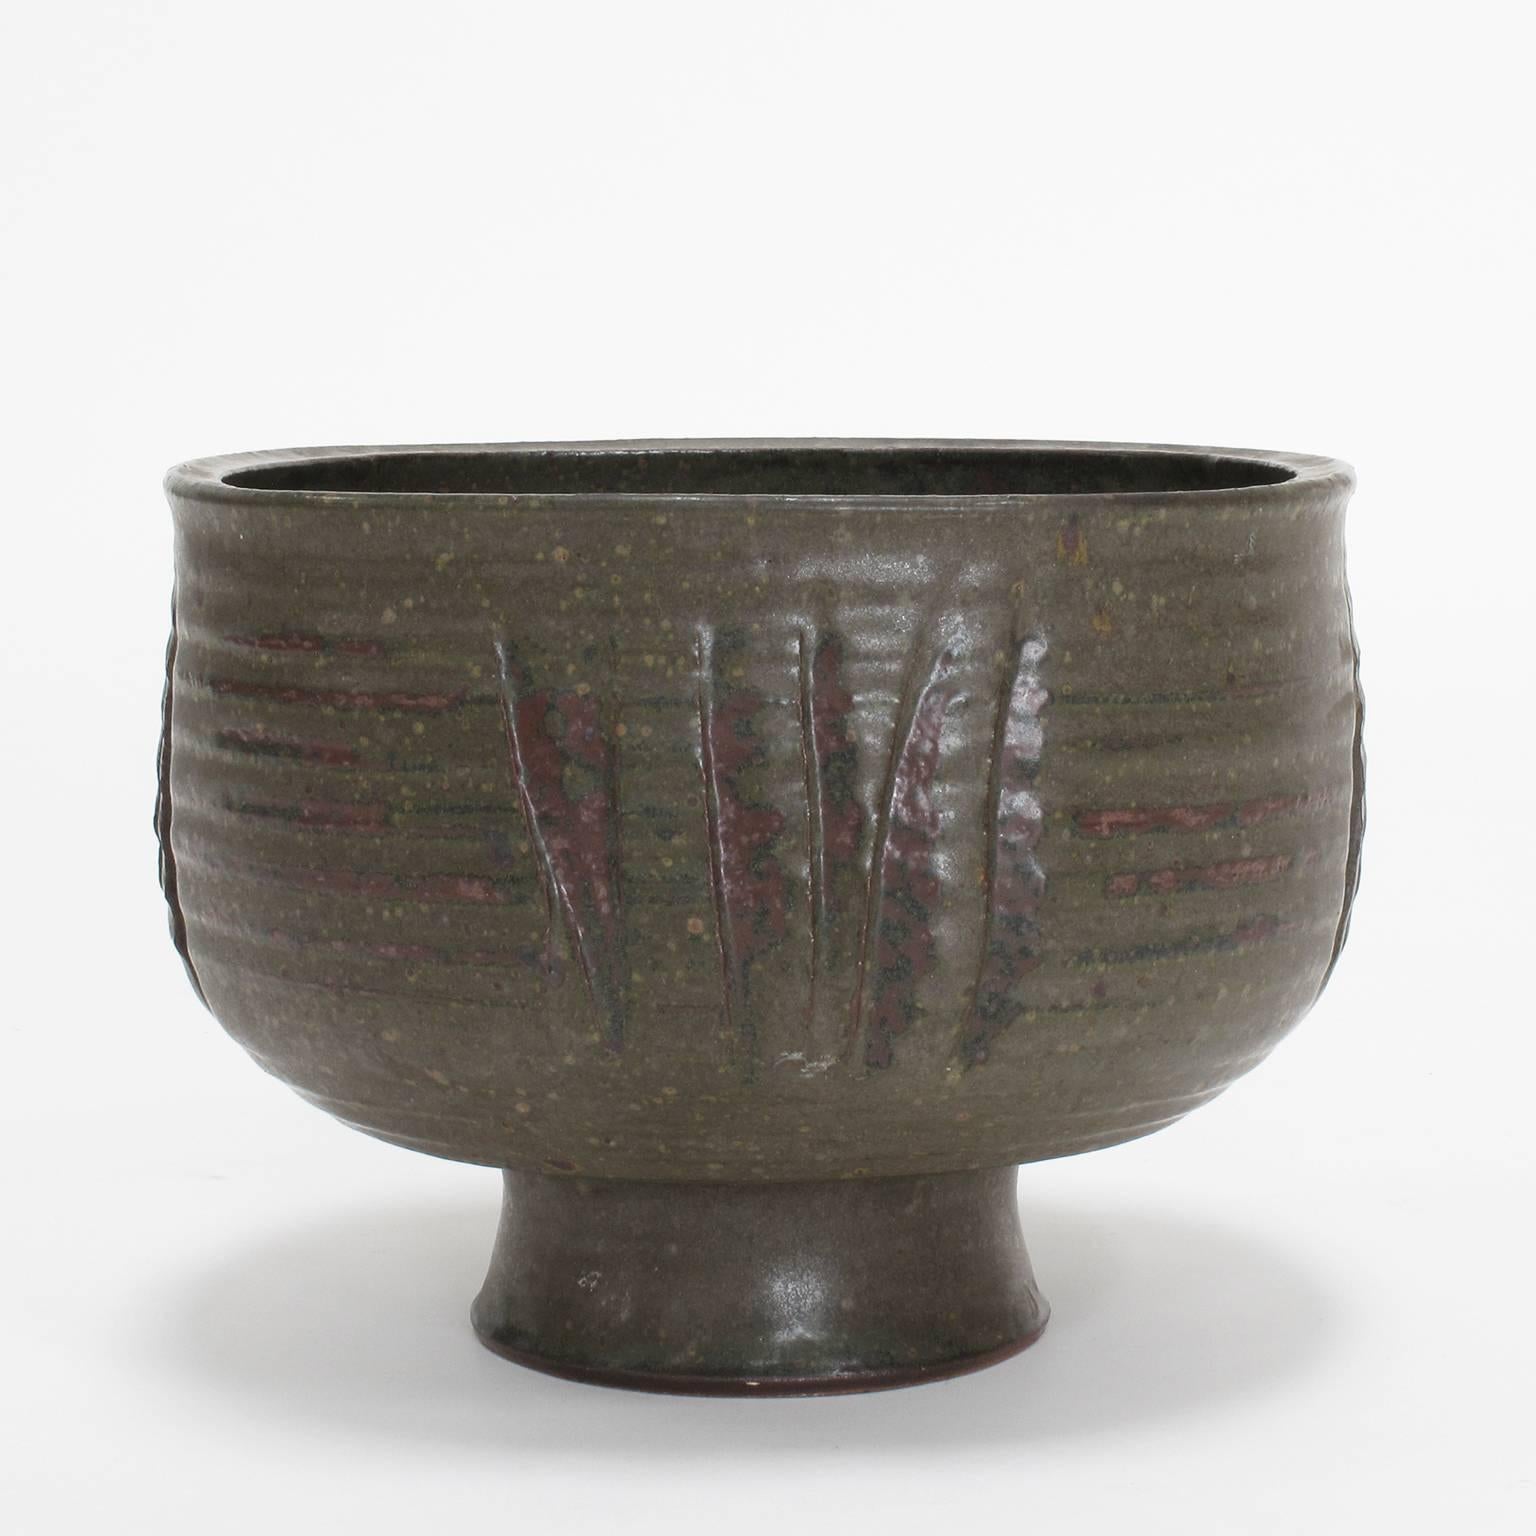 Laura Andreson
'Footed Bowl', 1956
Stoneware, glazed, linear sgraffito design
Unique, handmade, signed by artist
Los Angeles, California
Provenance: The Estate of David Cressey
Measurements in inches: 6.25 high x 9 wide x 8.5 deep
Please